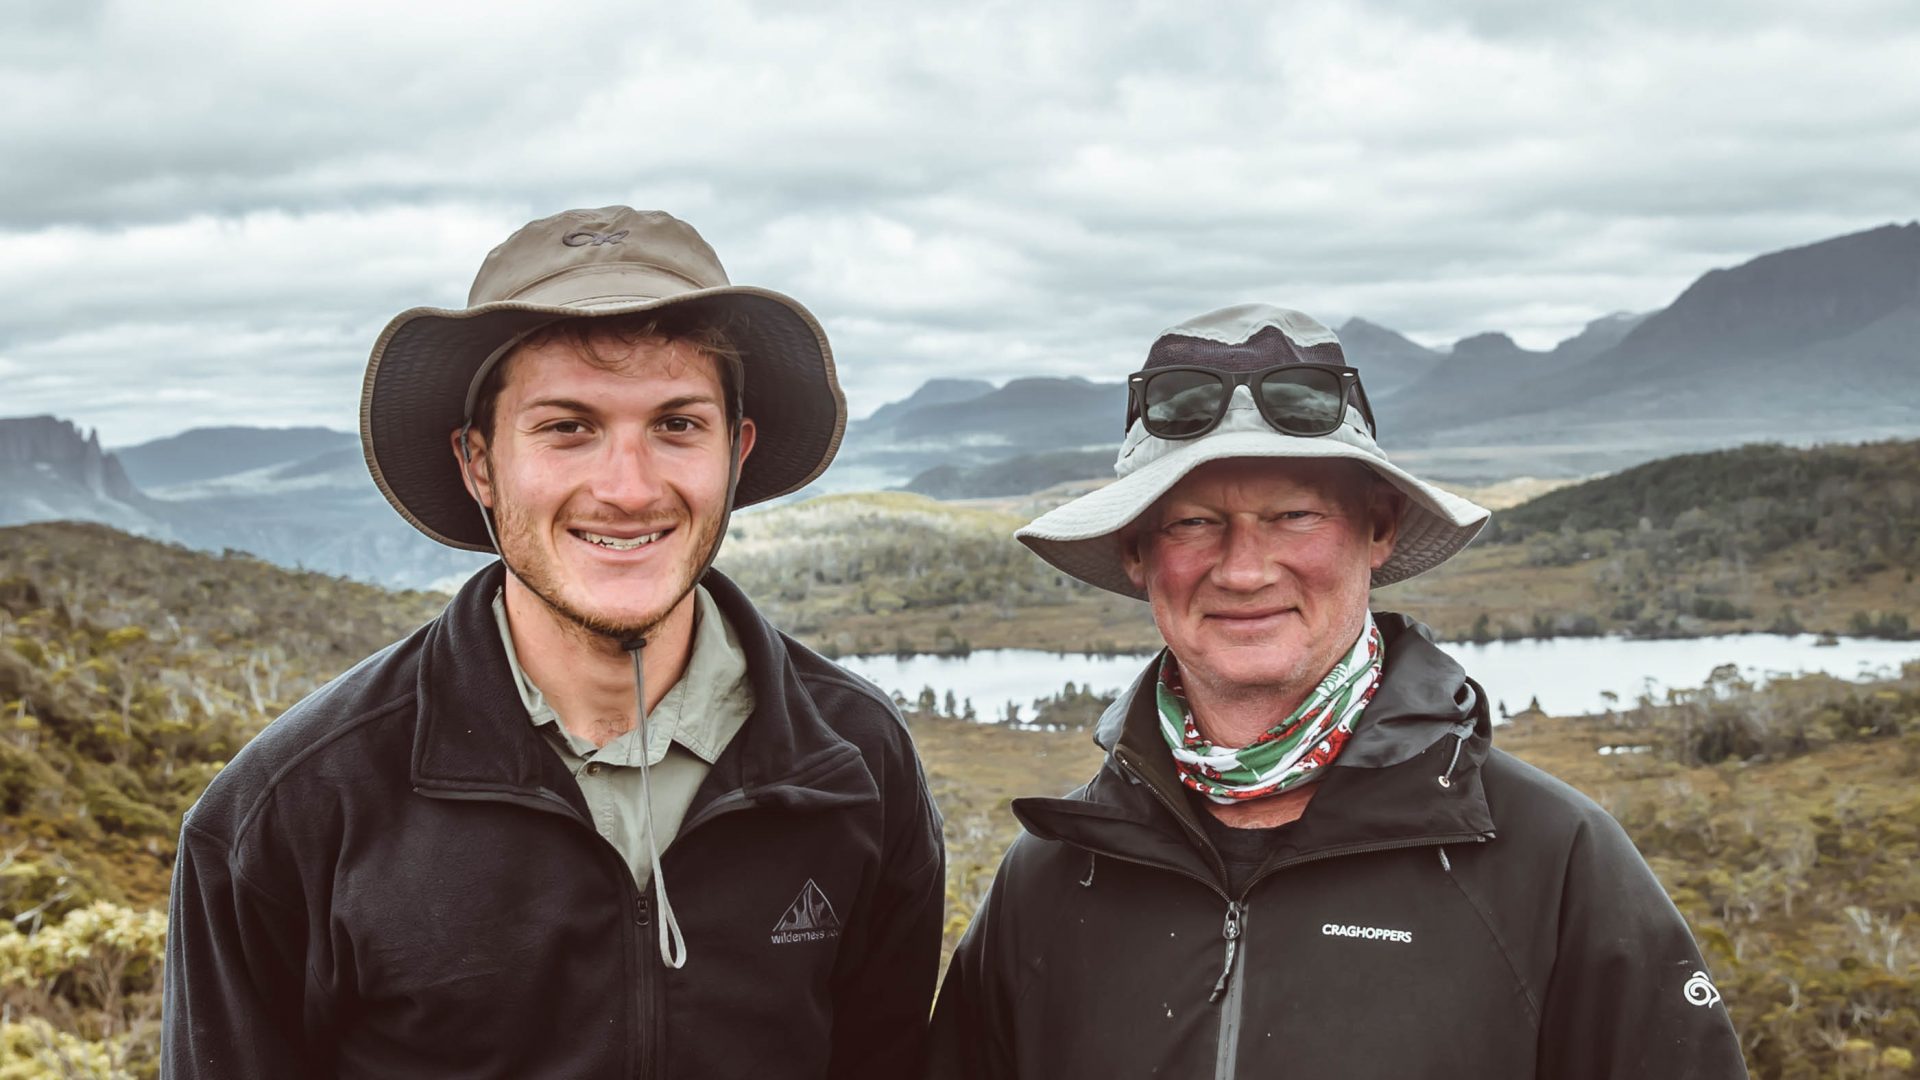 Portrait of the two guides smiling.